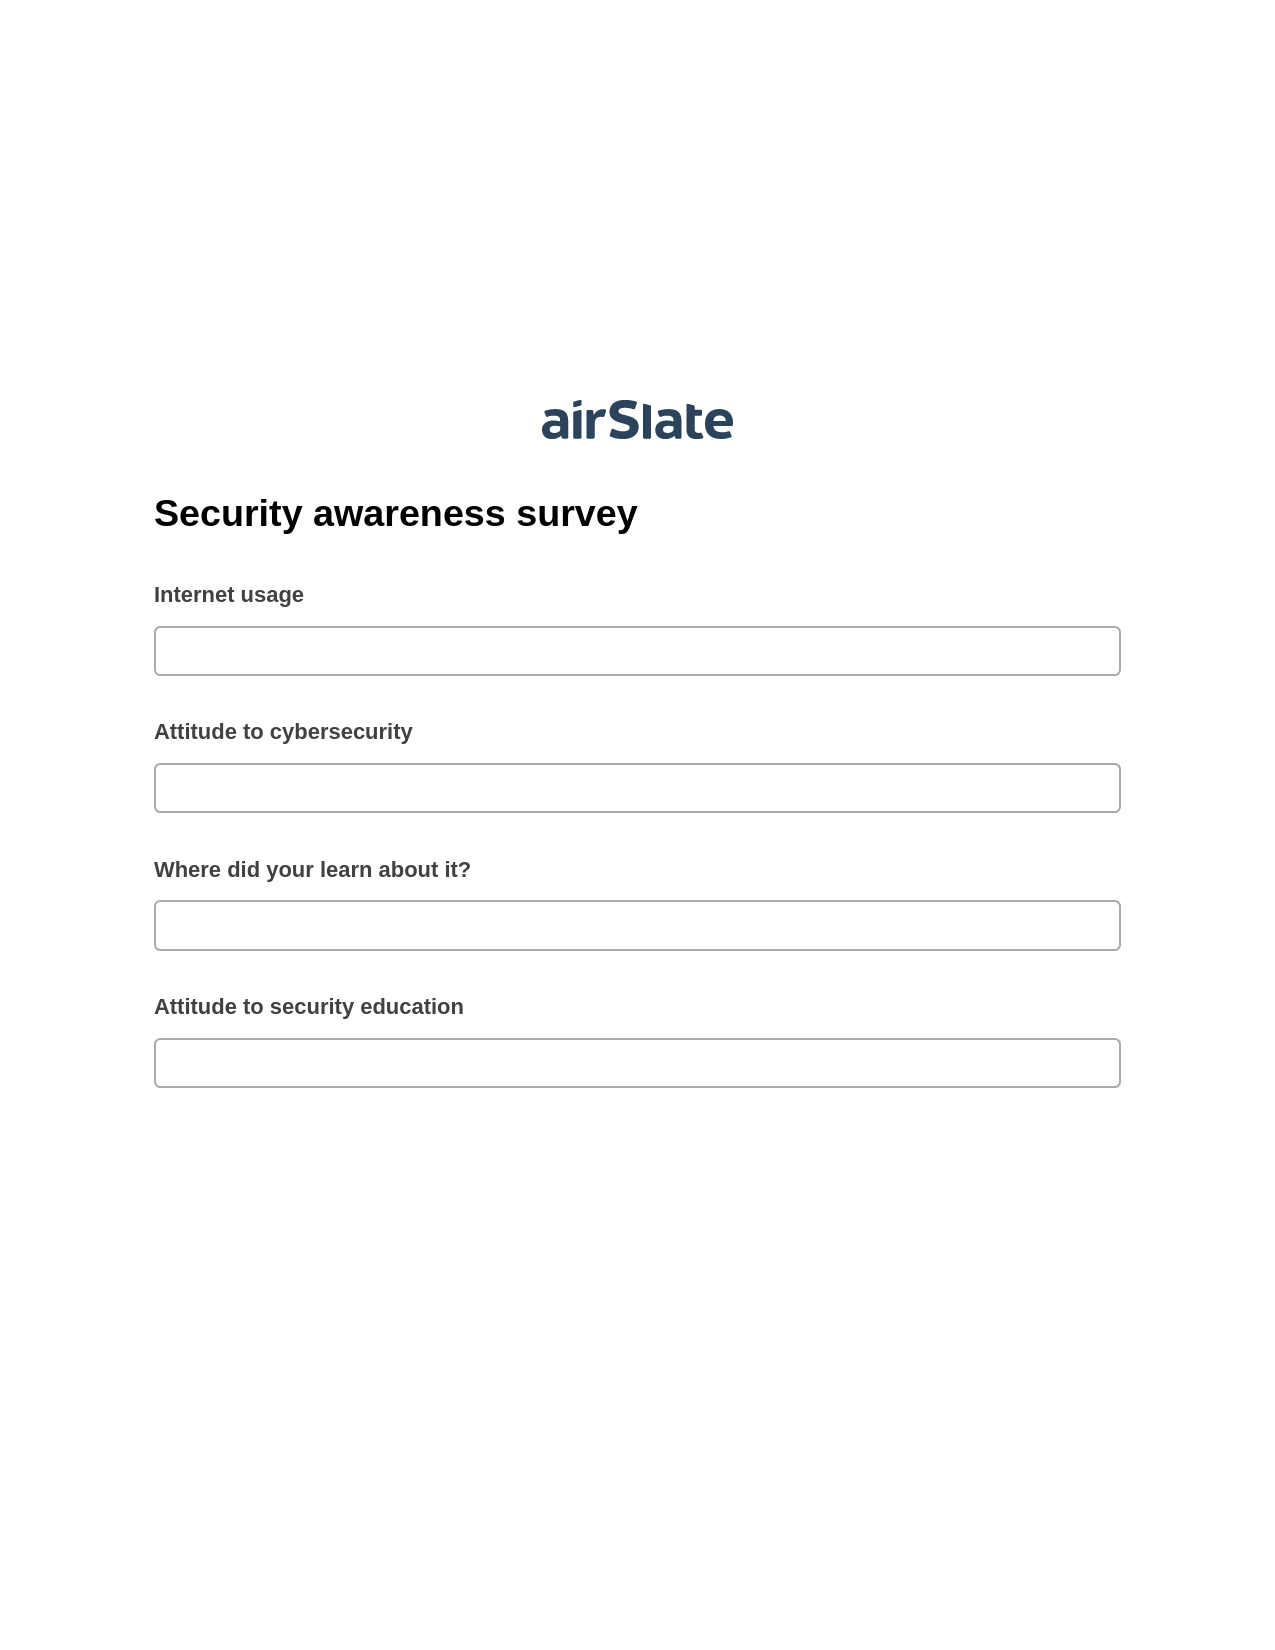 Security awareness survey Pre-fill from CSV File Bot, Roles Reminder Bot, Email Notification Postfinish Bot